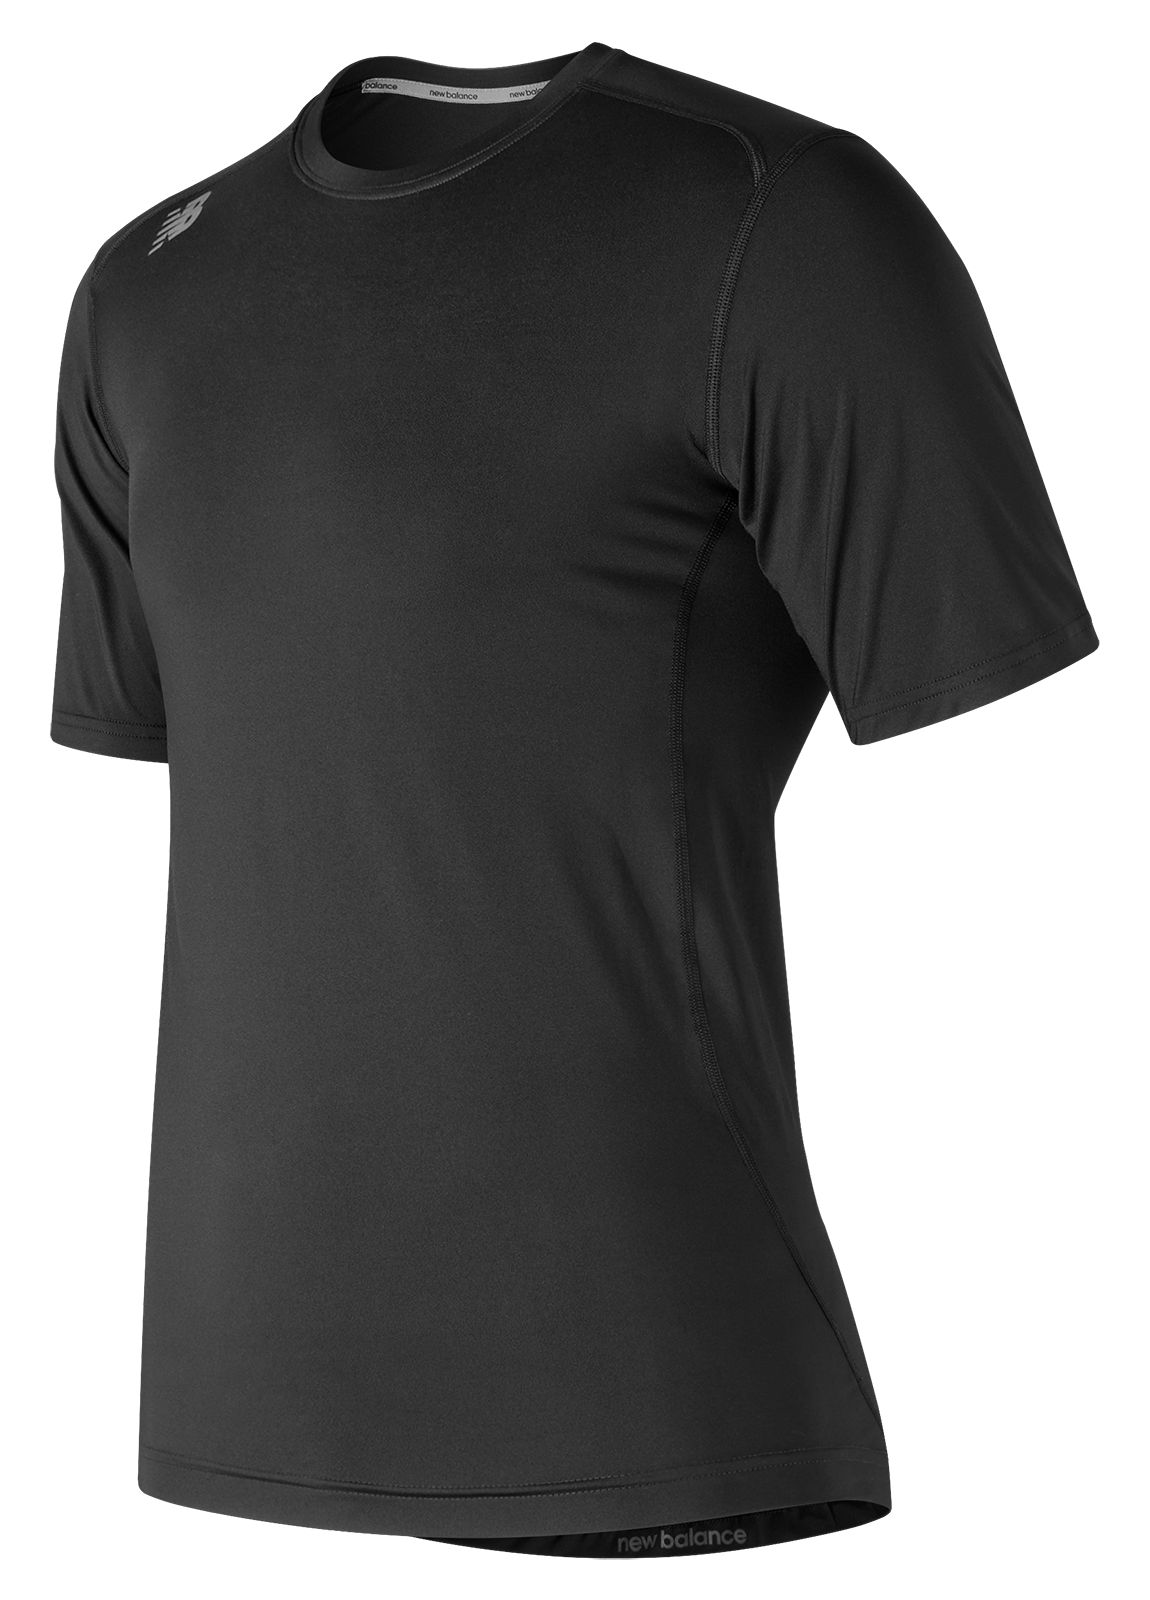 NB SS Compression Top